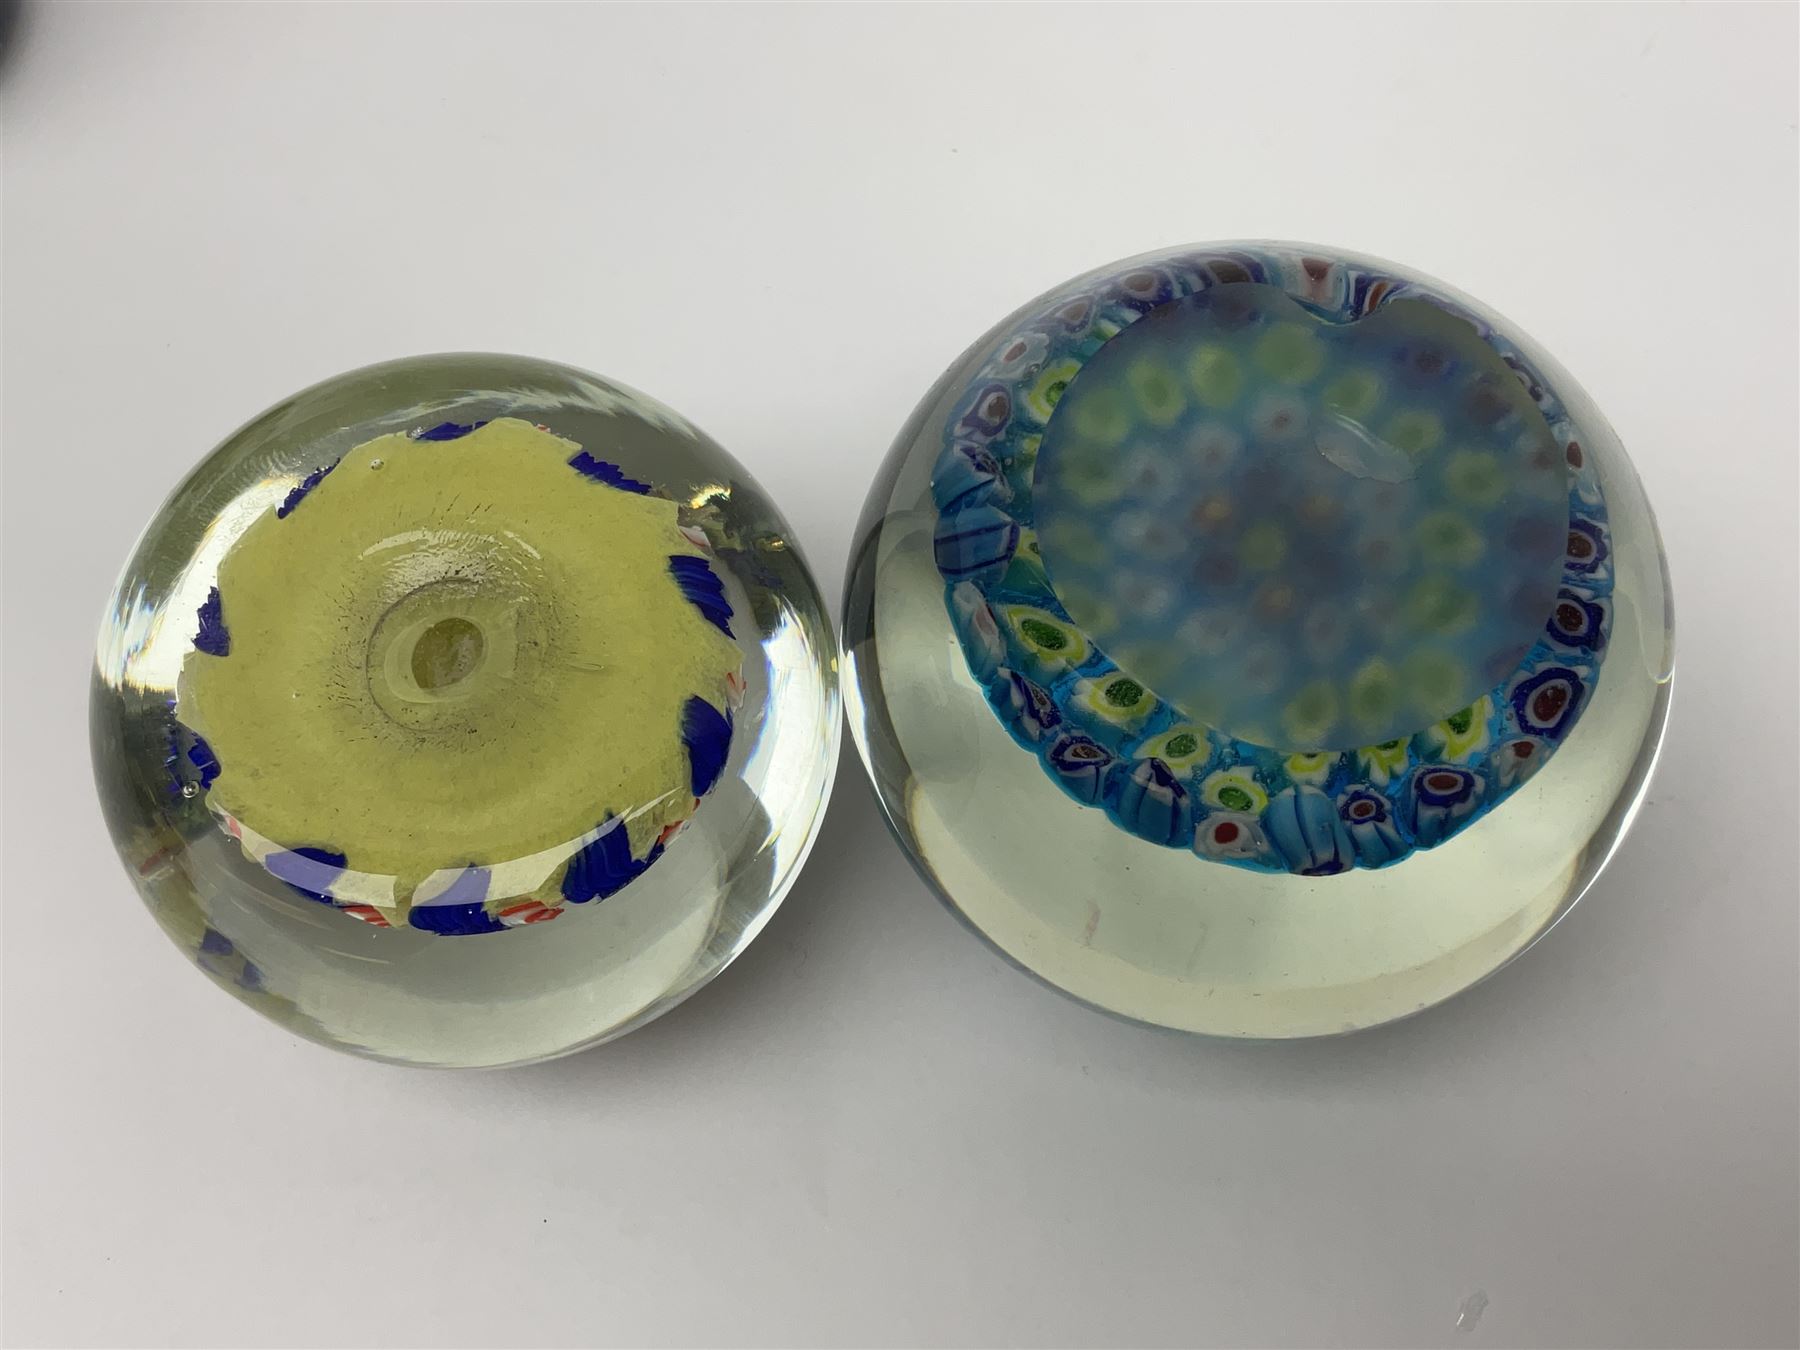 John Ditchfield for Glassform iridescent glass paperweight - Image 6 of 8